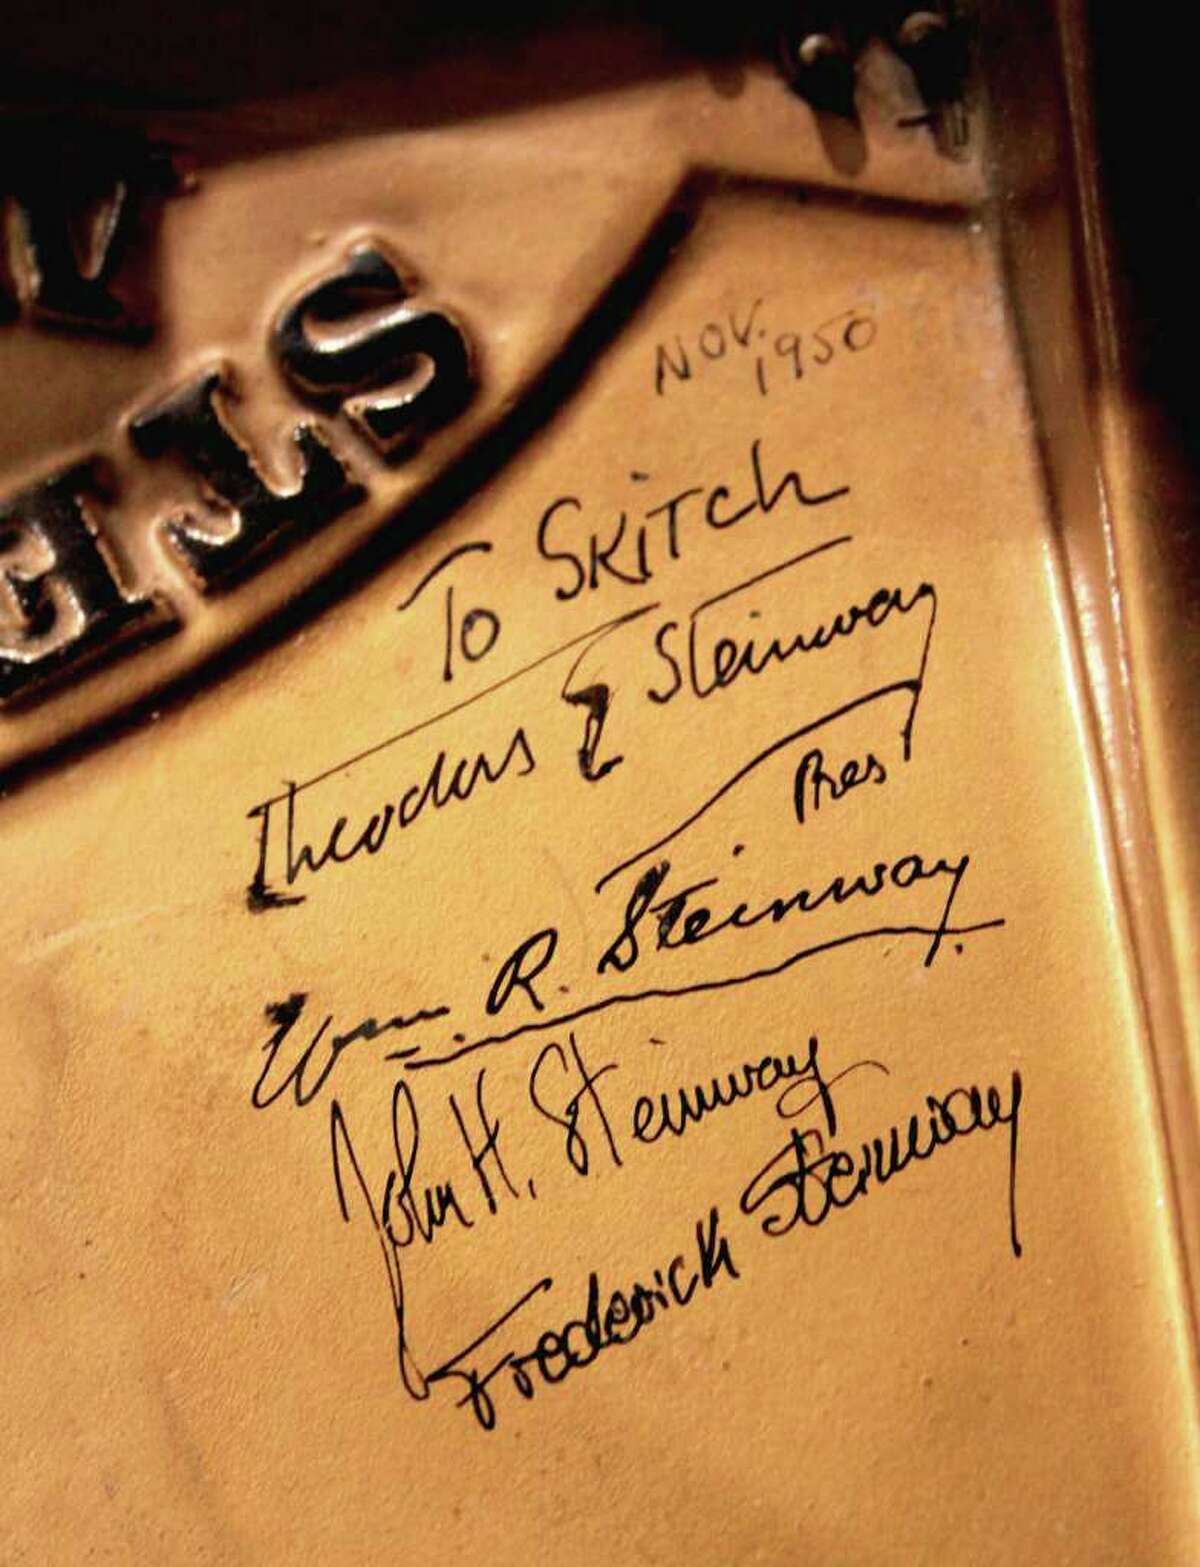 Skitch Henderson's Steinway piano Model B 332408 was signed by members of the Steinway family in November of 1950. Signatures include Theodore Steinway and brother William. Sons of Theodore, John and Frederick also signed the piano. Photo taken April 28, 2011.